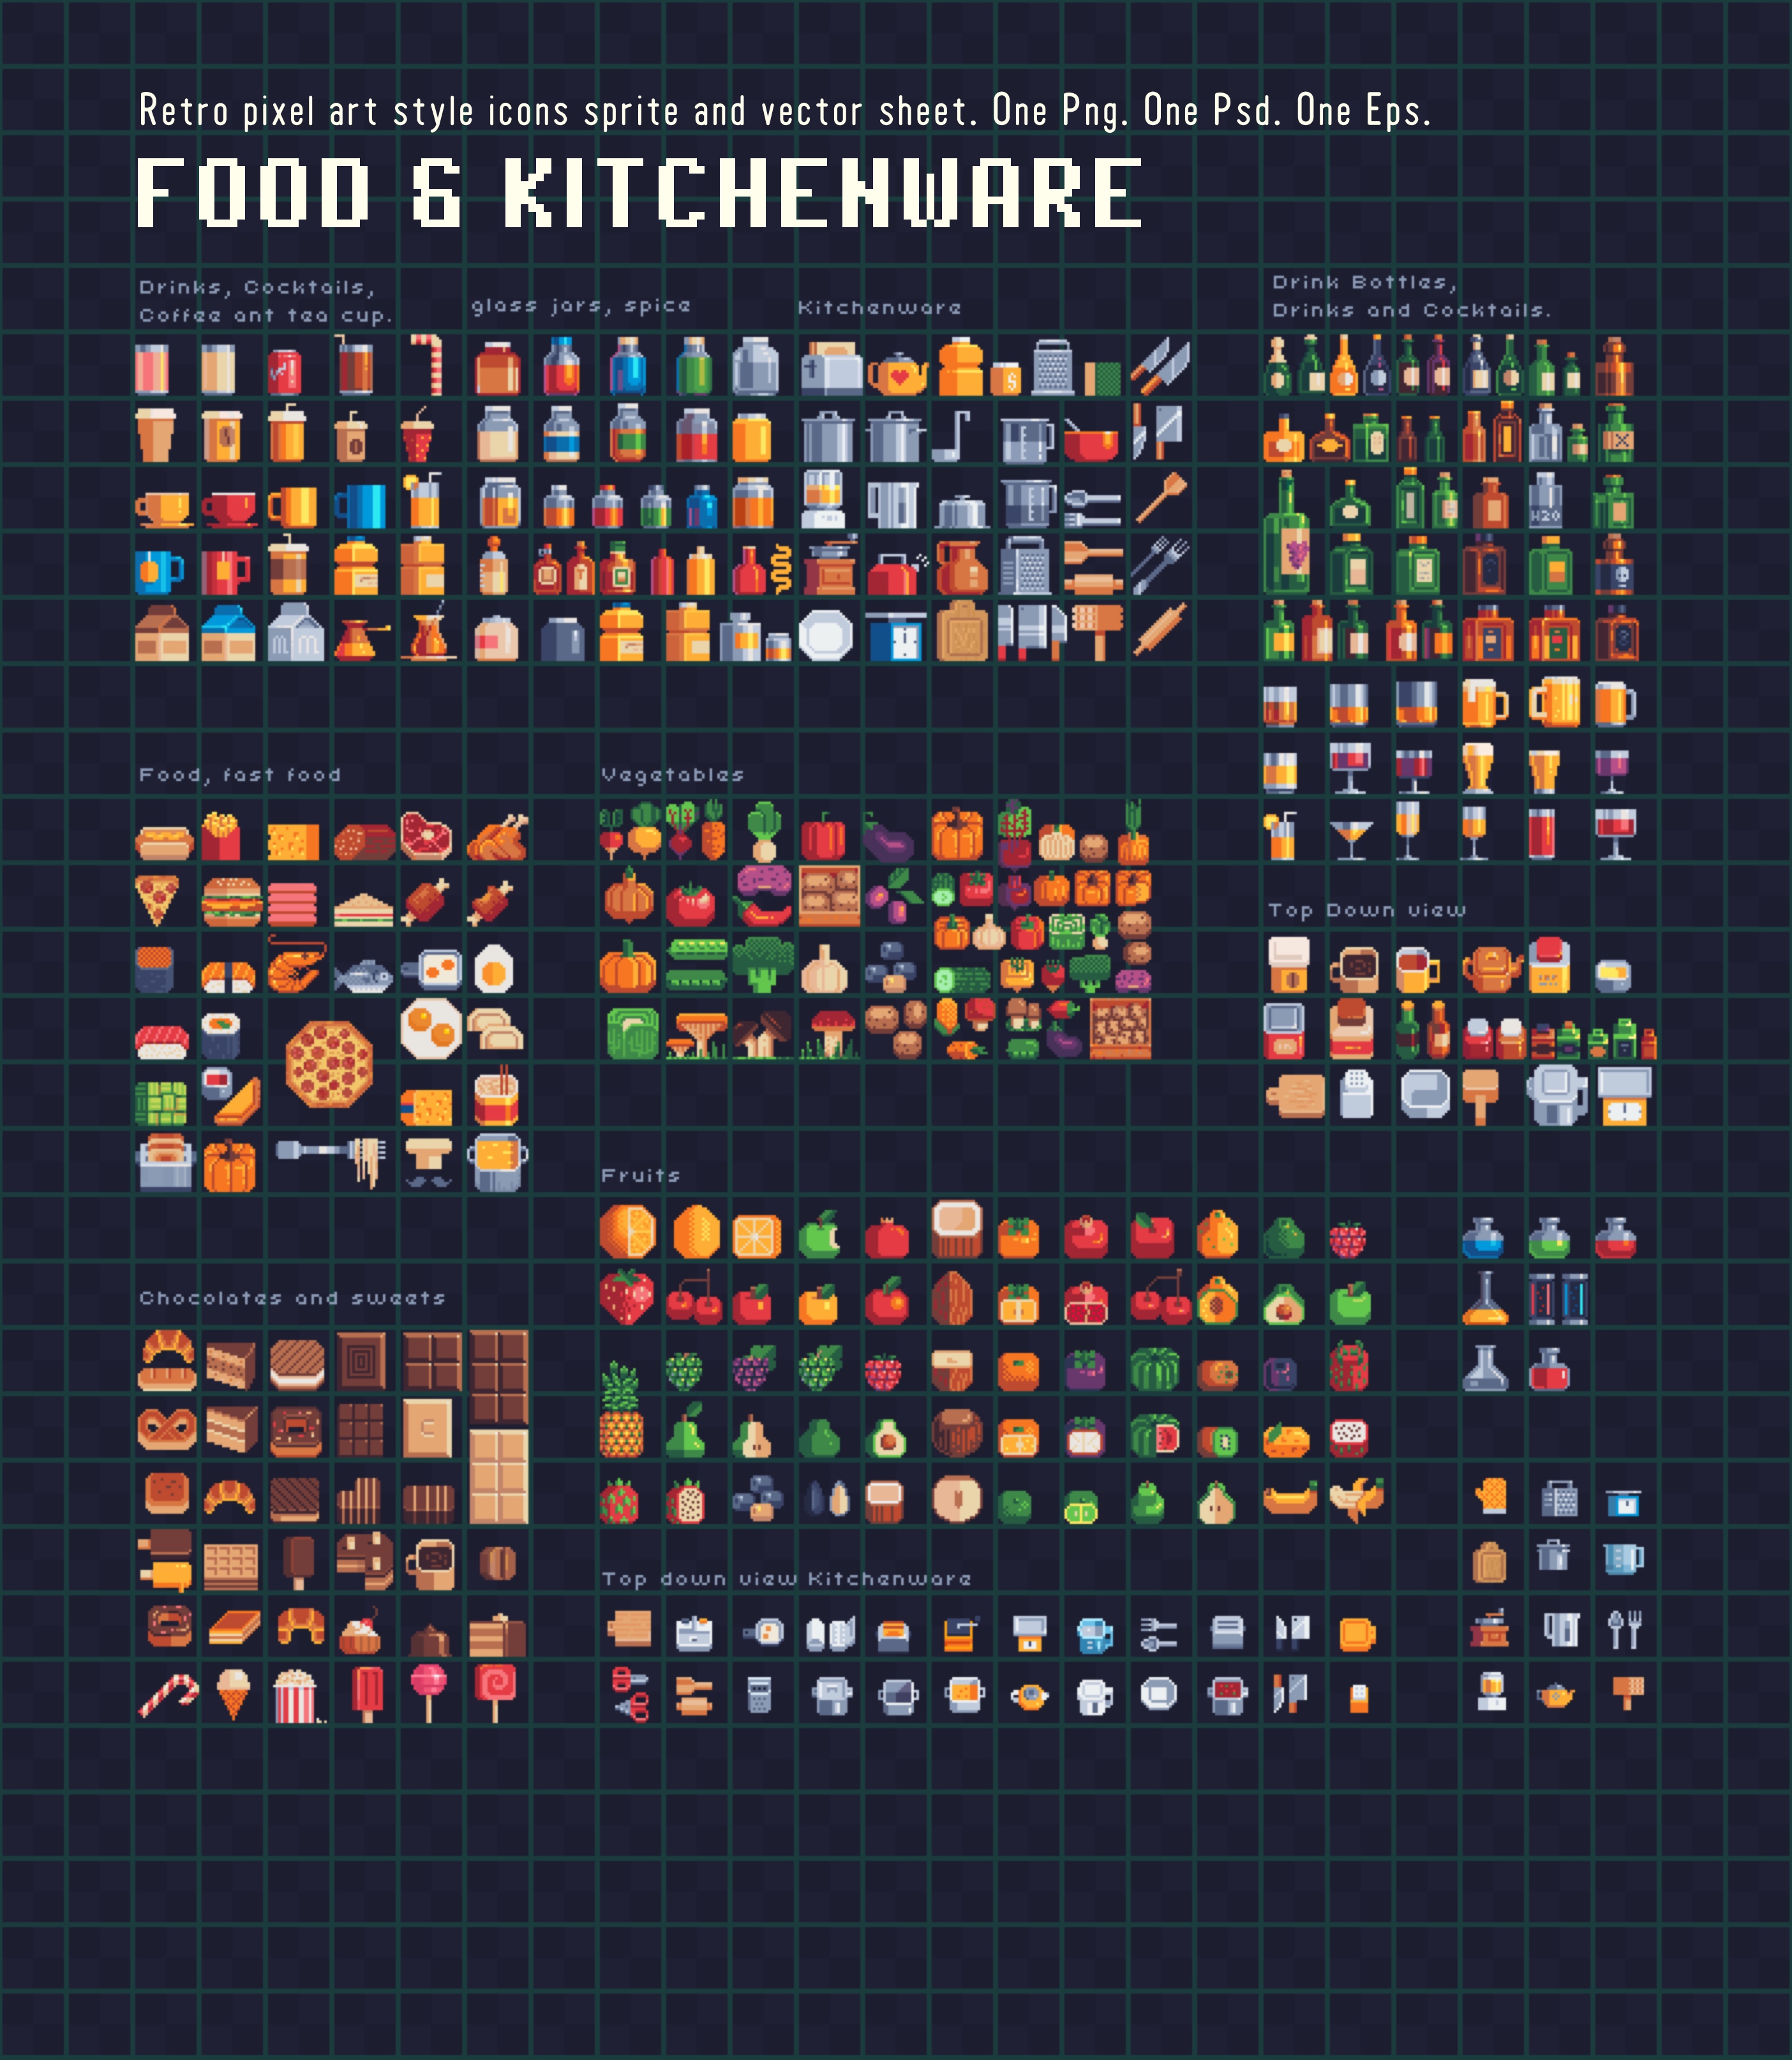 Cover art for the Food & Kitchenware pack